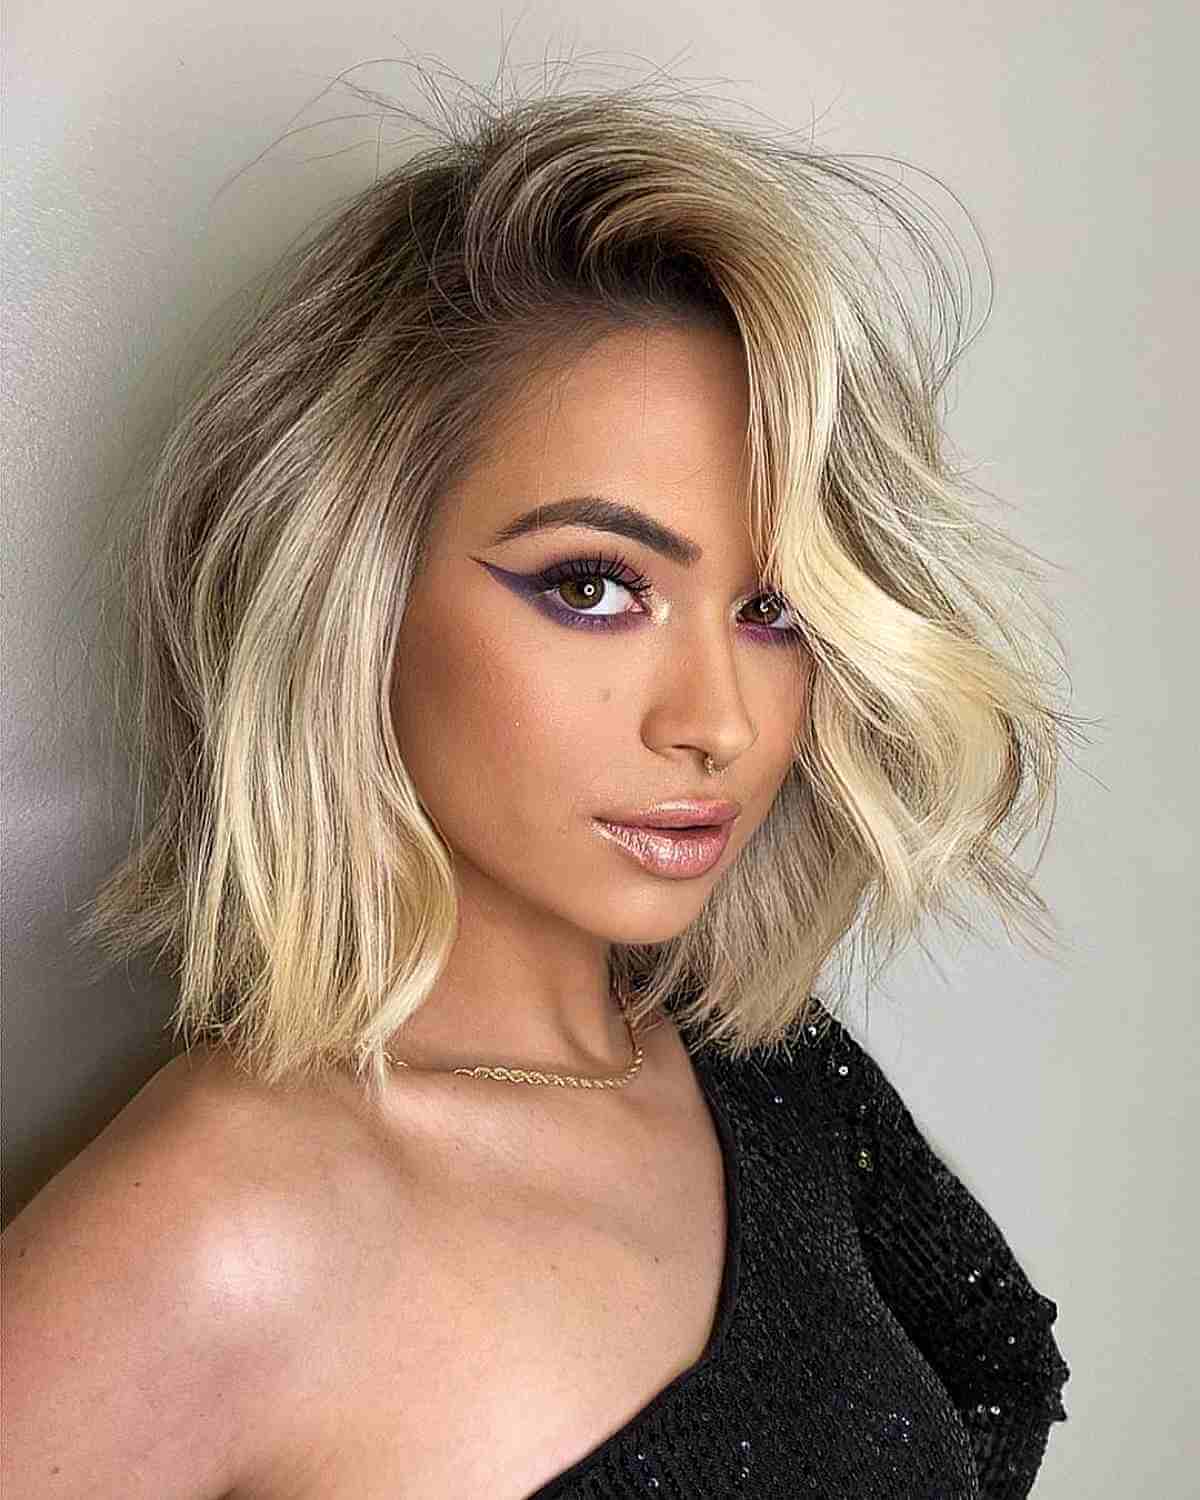 71 Impressive Deep Side Part Hairstyles To Pull Off a Simple Yet Stunning Look